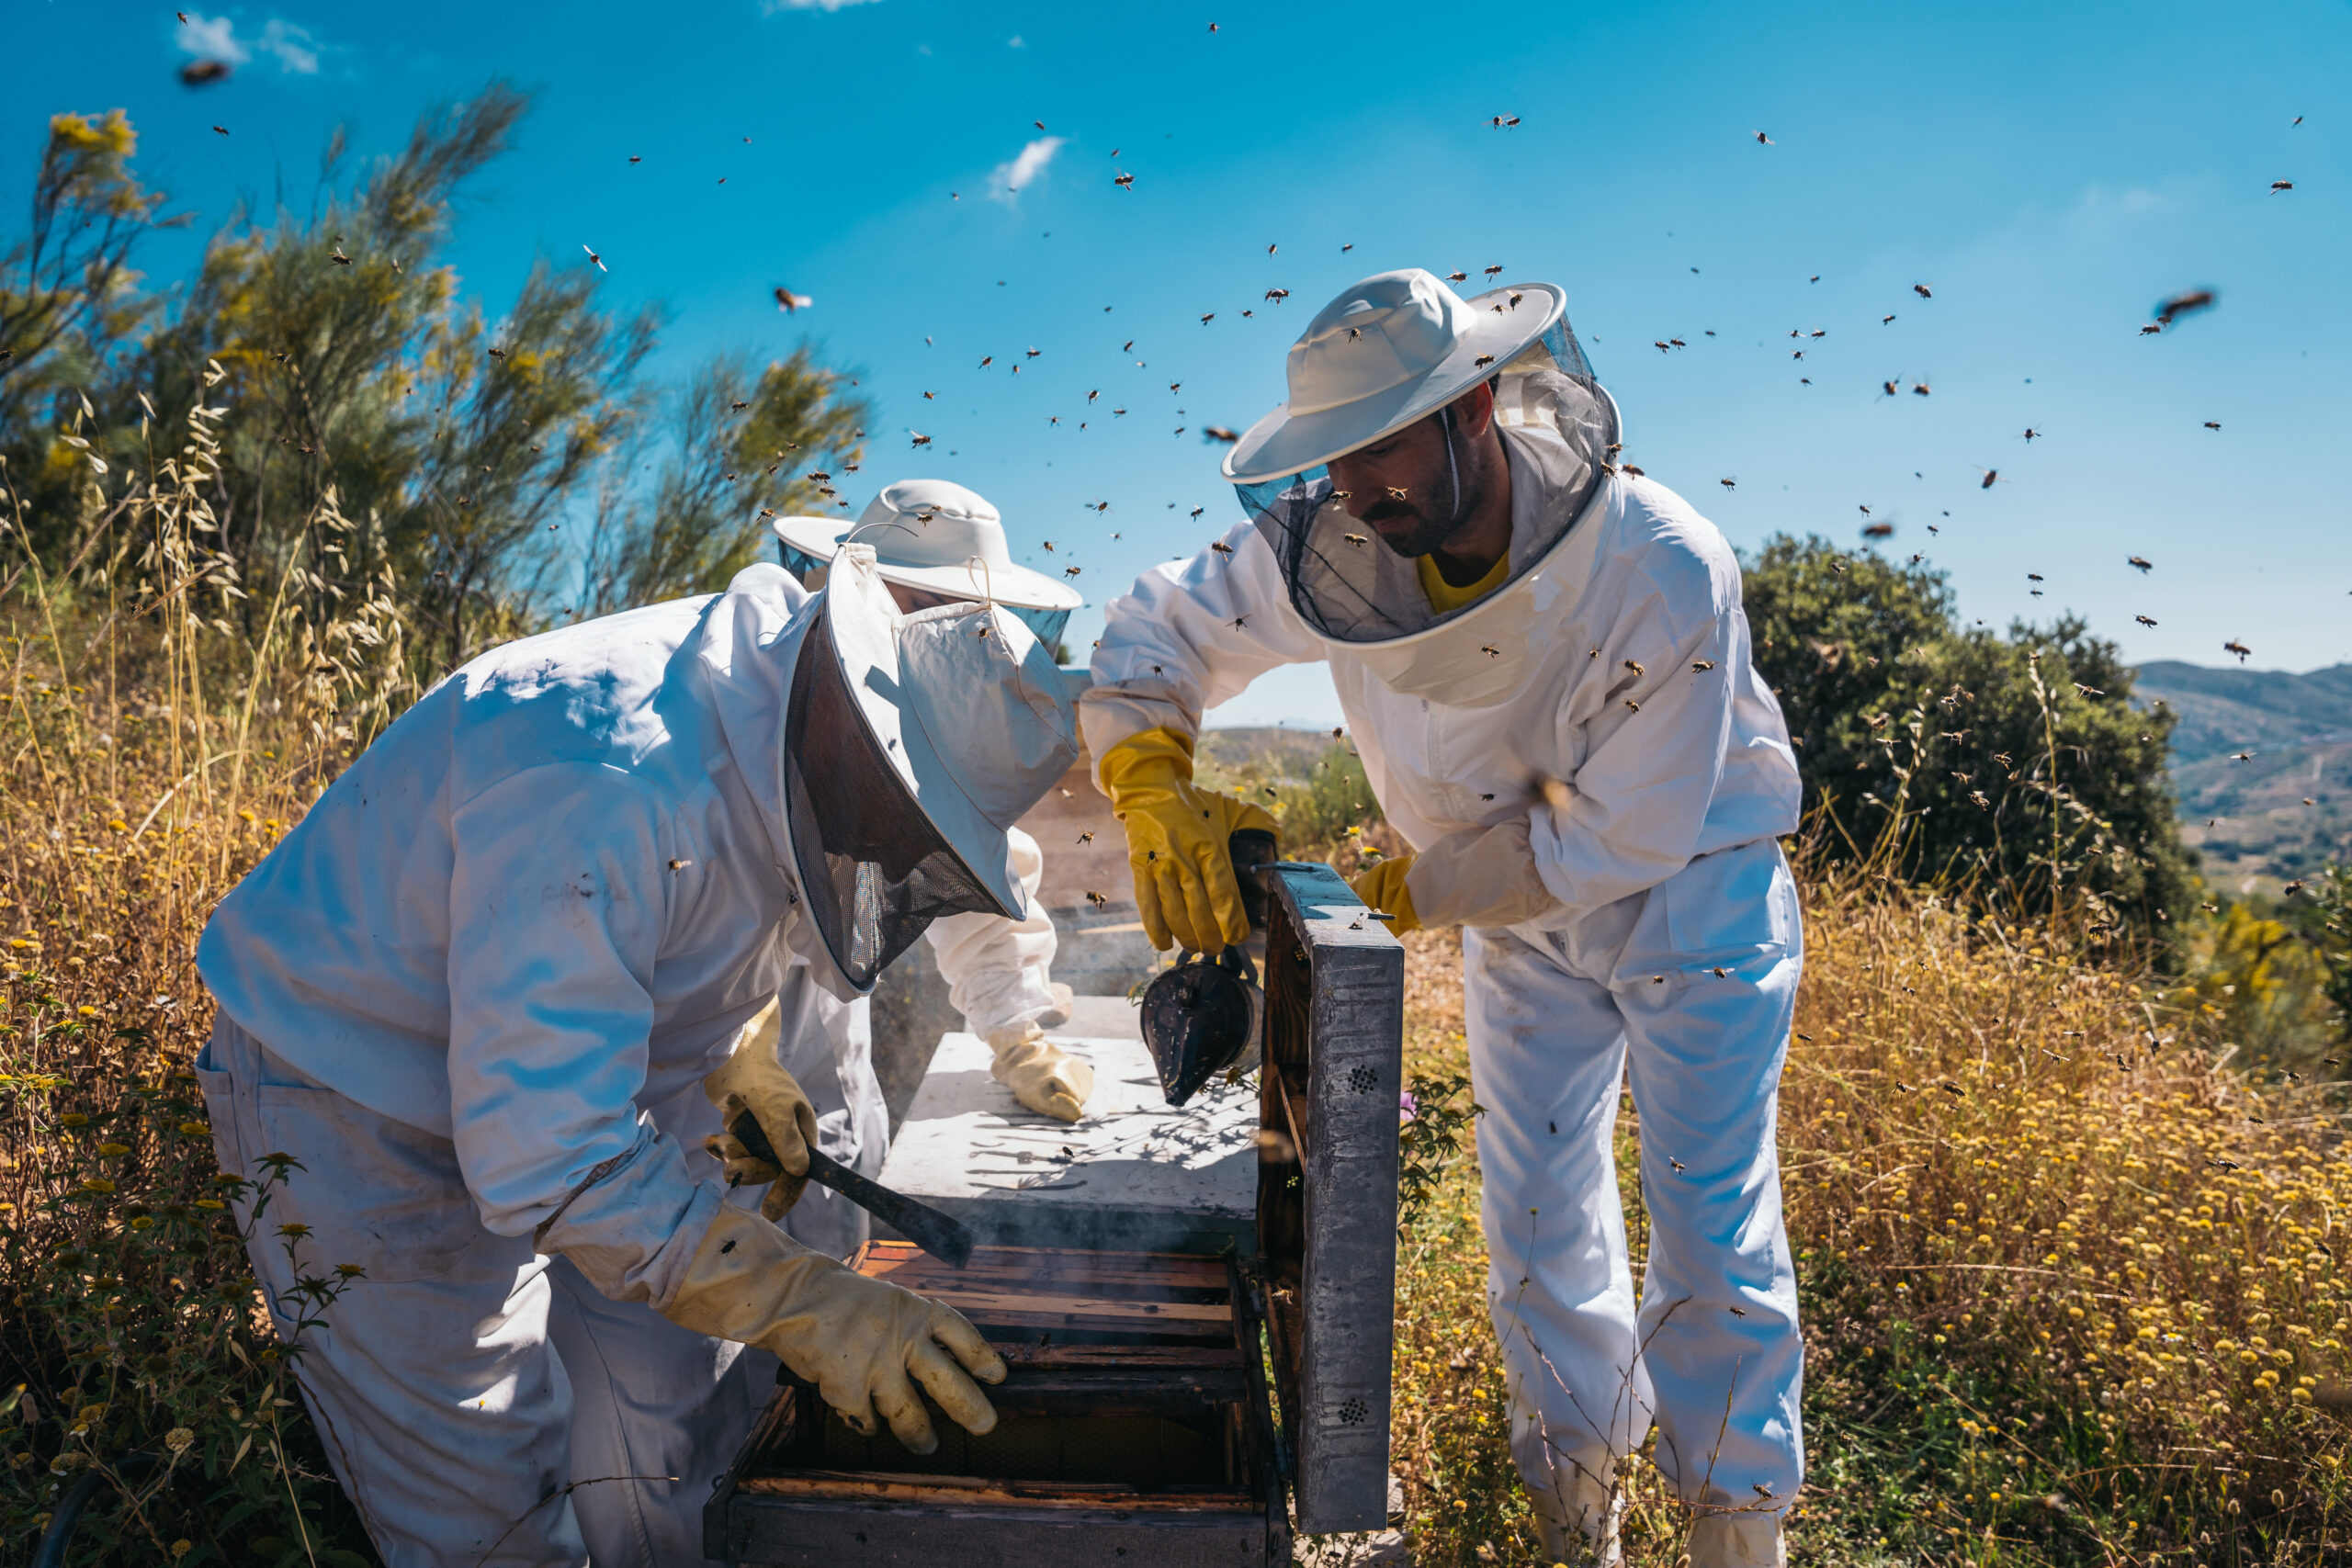 Beekeepers working to collect honey. Organic and healthy beekeeping concept.